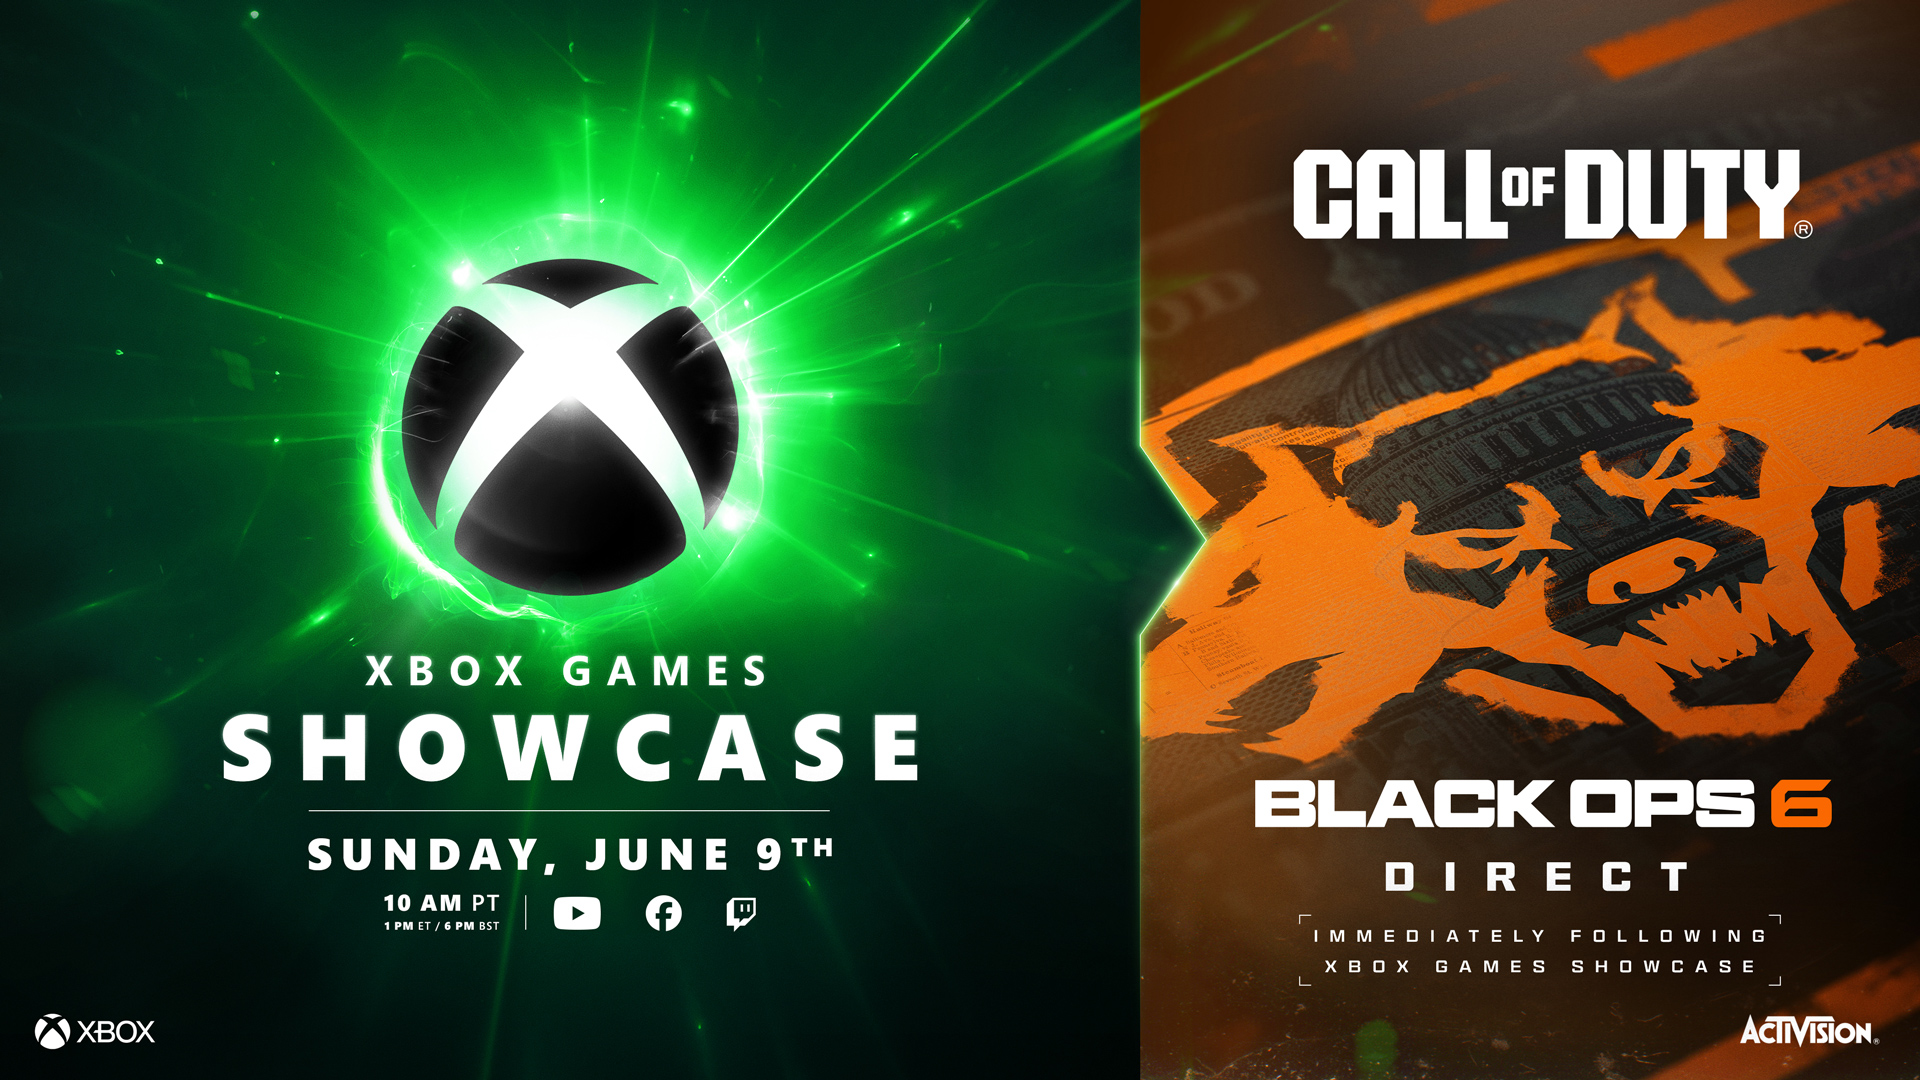 How to Watch the Xbox Games Showcase and Call of Duty: Black Ops 6 Direct on Sunday